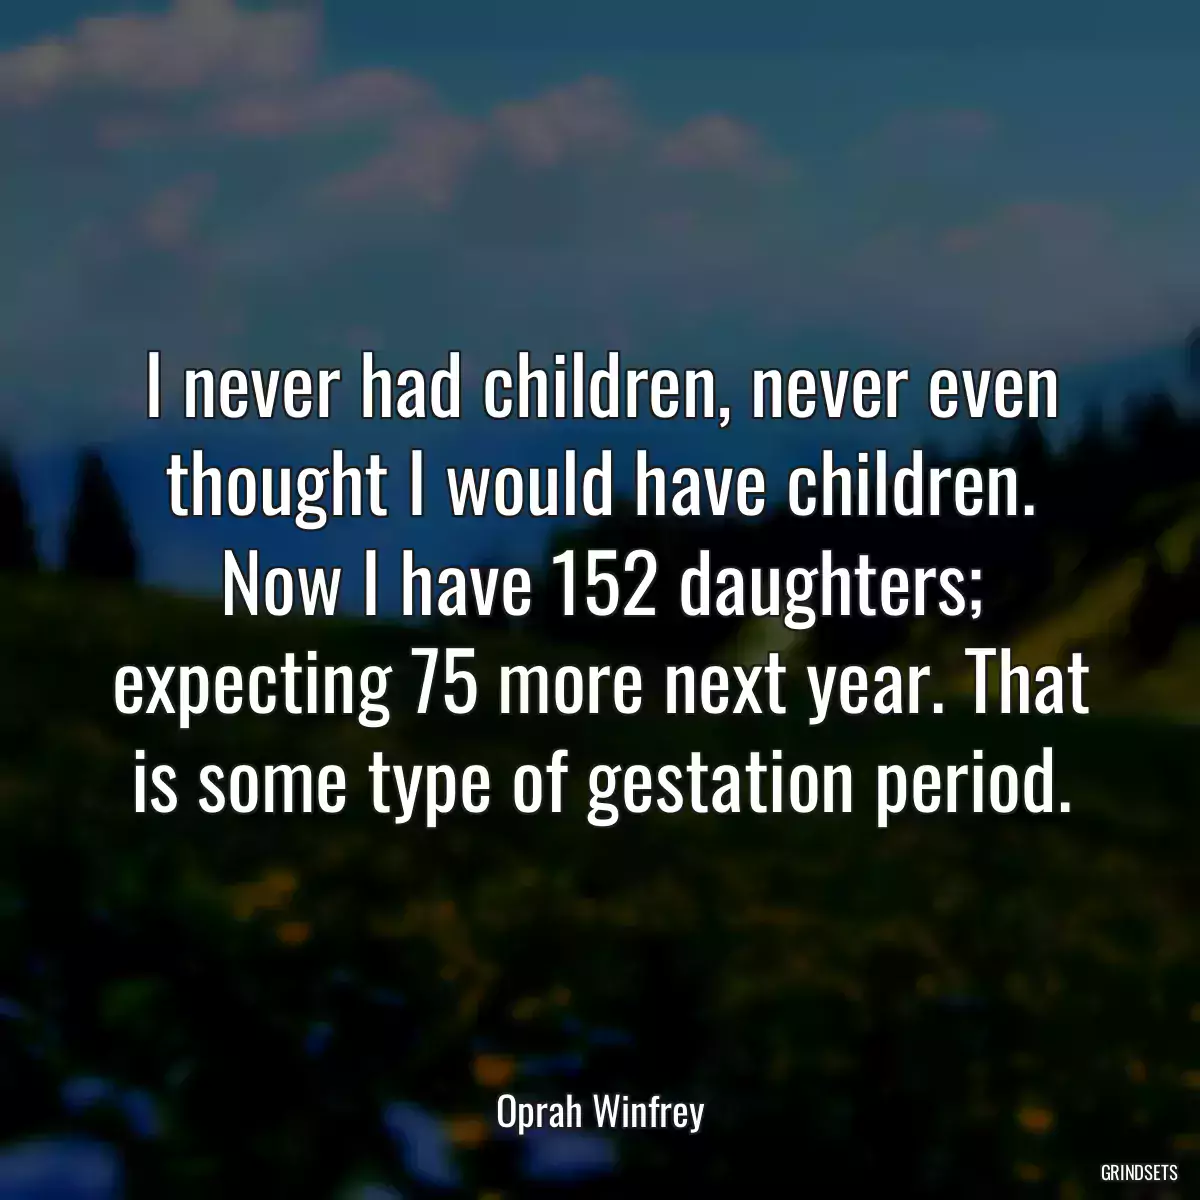 I never had children, never even thought I would have children. Now I have 152 daughters; expecting 75 more next year. That is some type of gestation period.